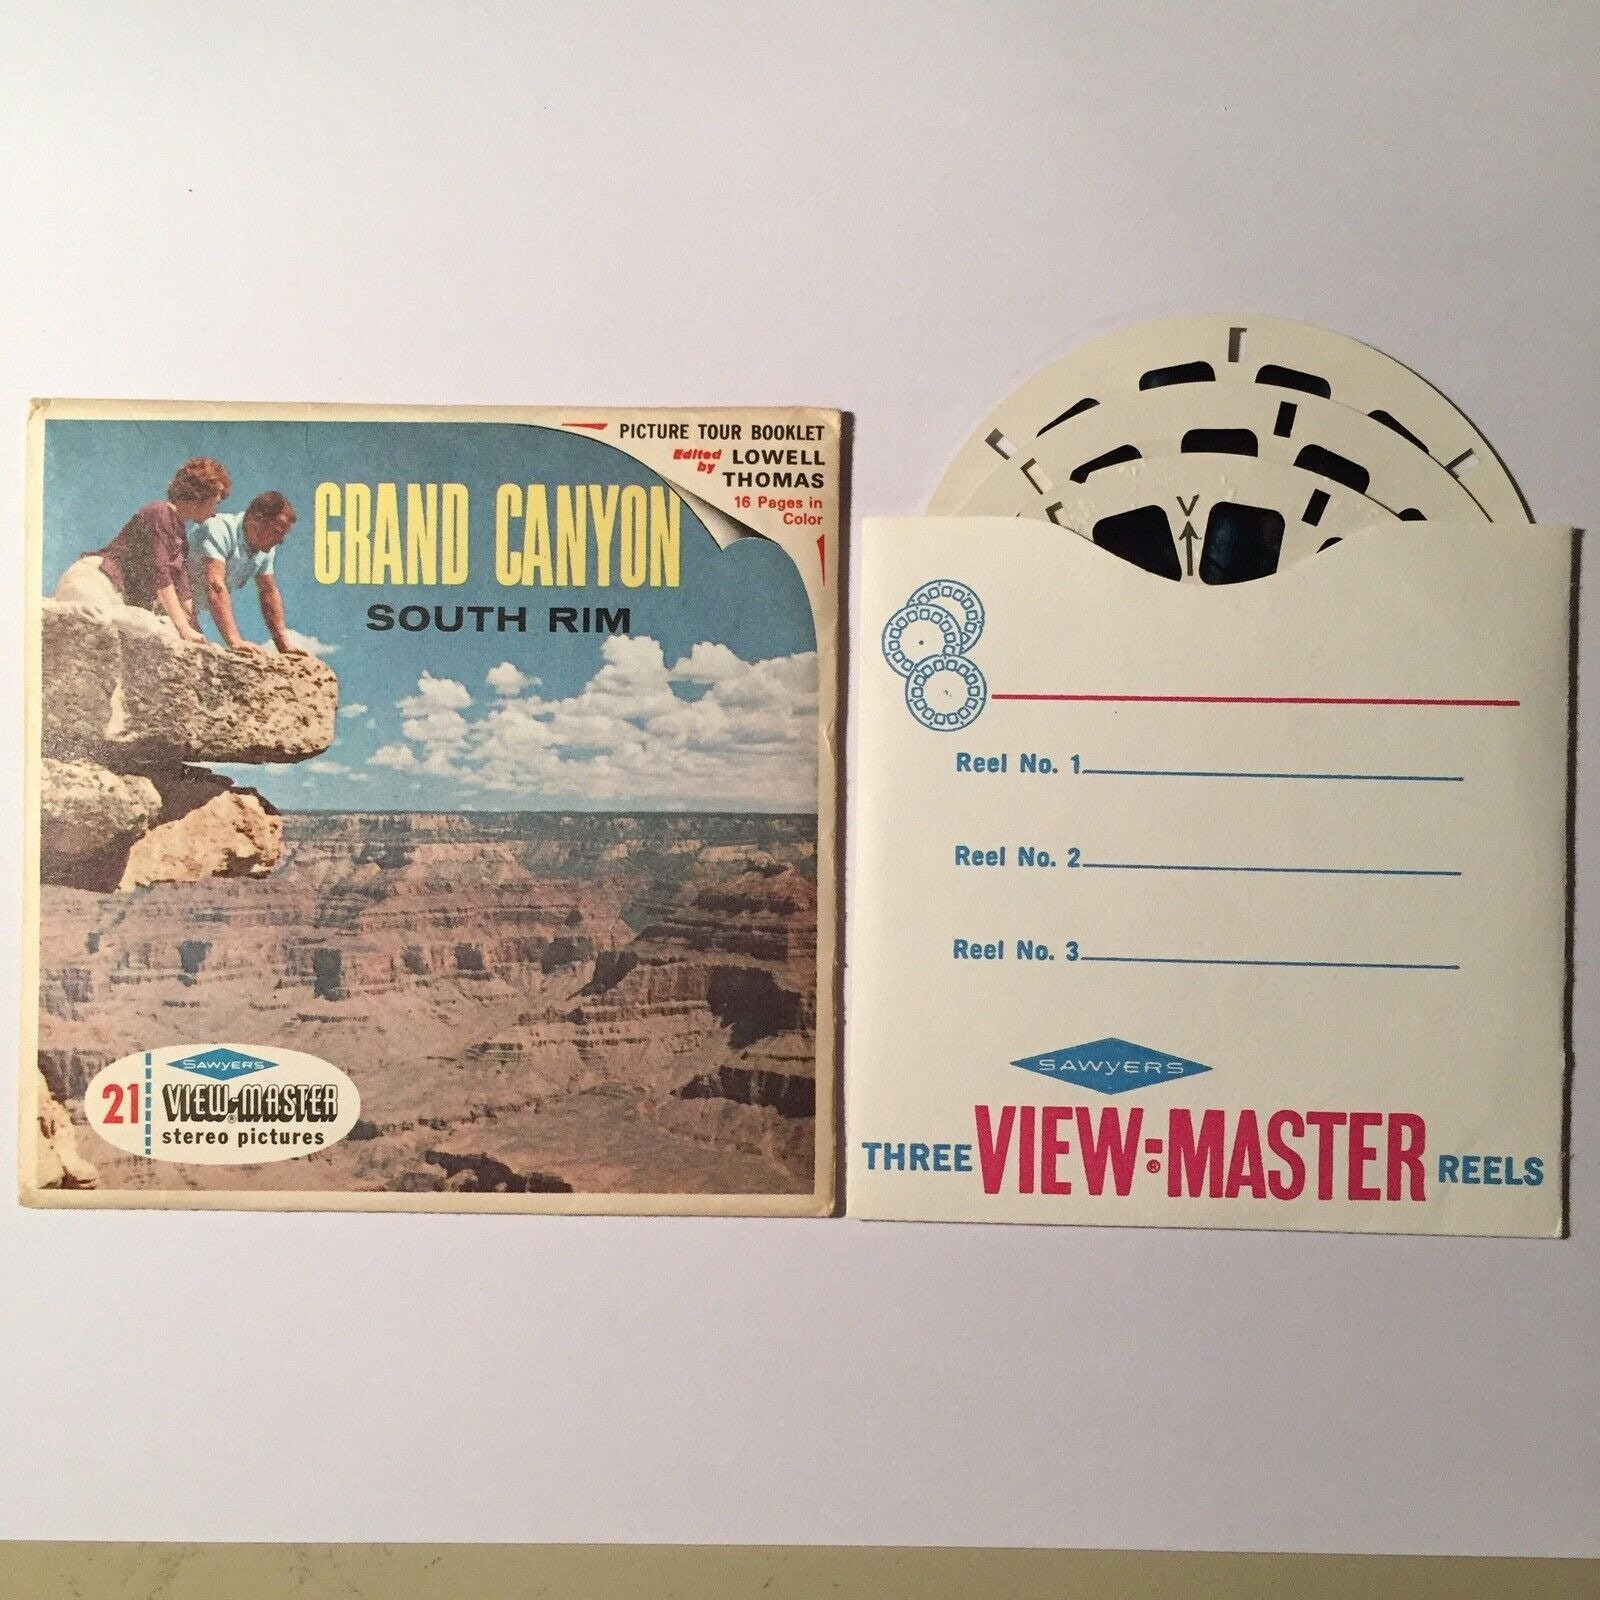 View Master Stereo Pictures Grand Canyon South Rim Photos 3 Reels